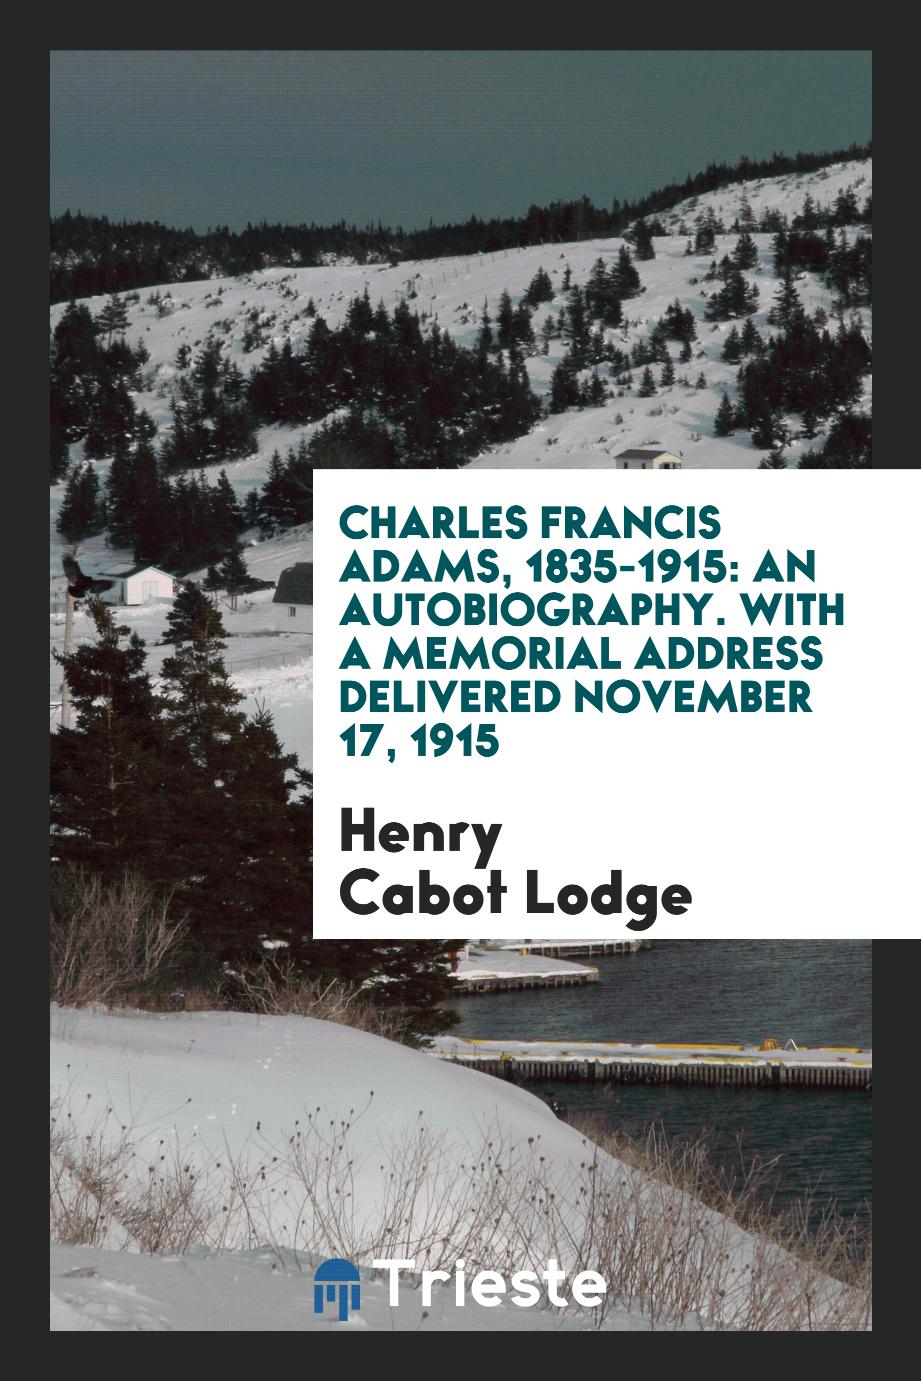 Charles Francis Adams, 1835-1915: An Autobiography. With a Memorial Address Delivered November 17, 1915